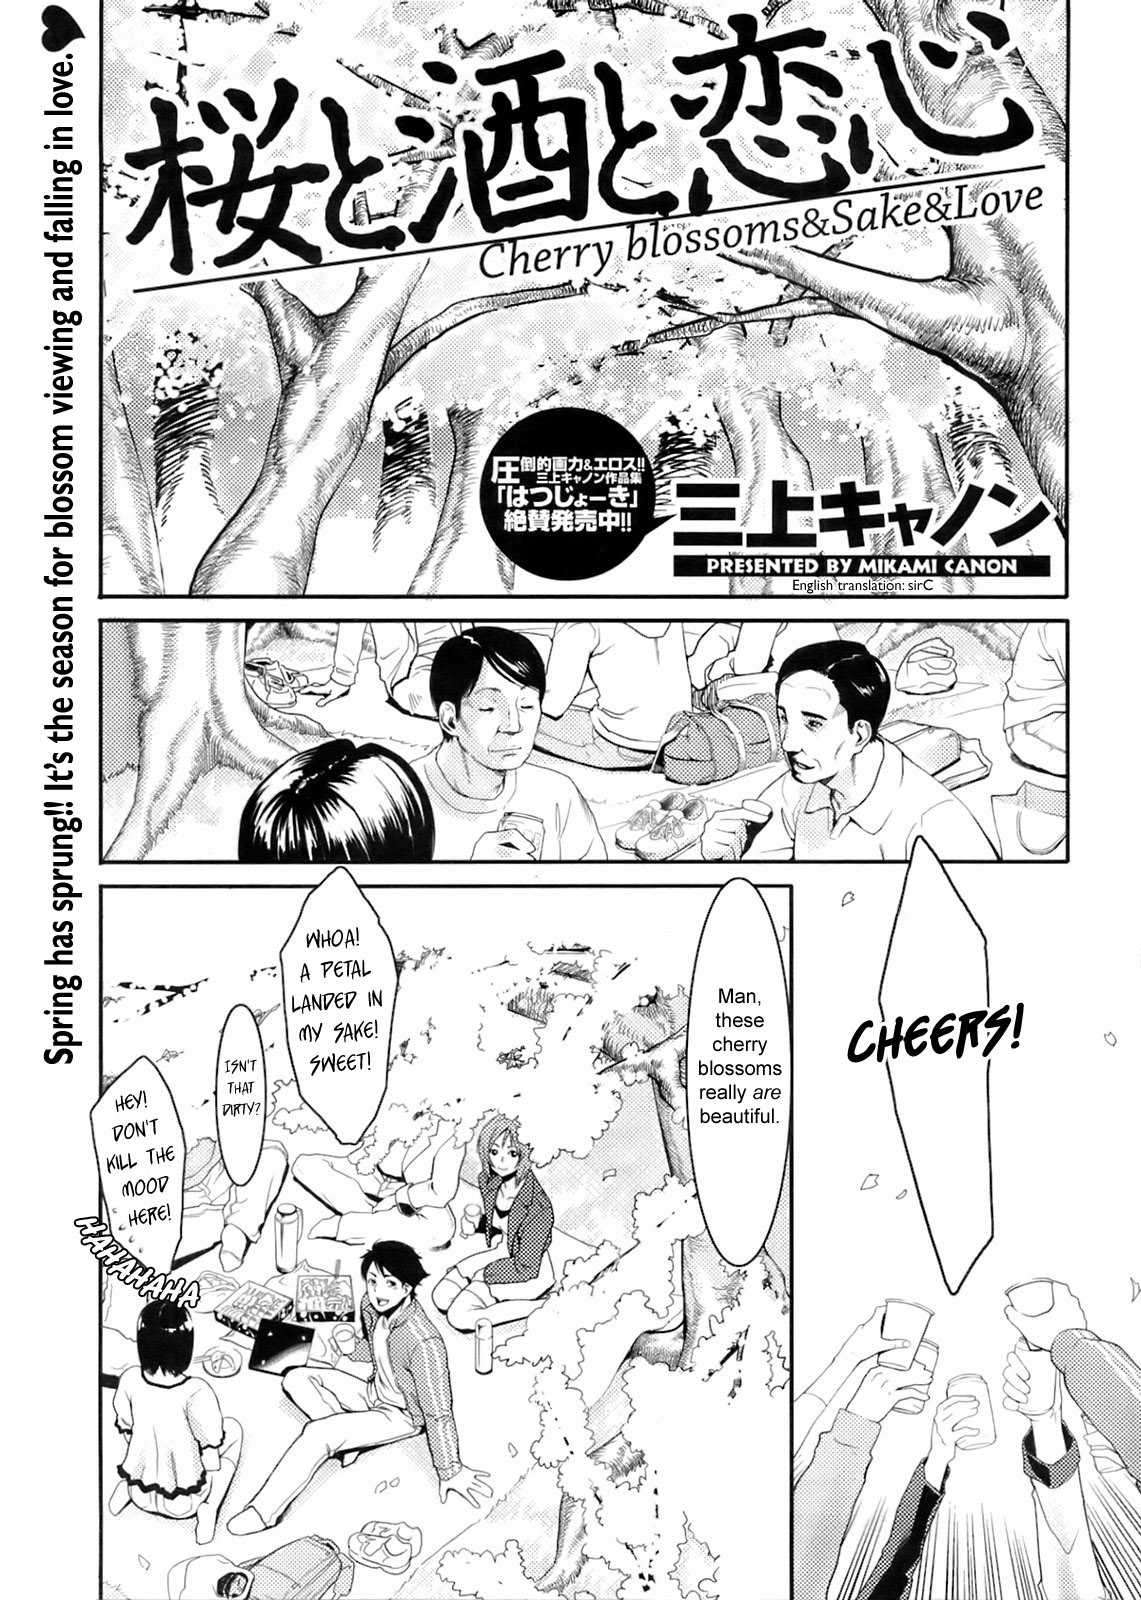 [Mikami Cannon] Cherry Blossoms &amp; Sake &amp; Love [ENG] 